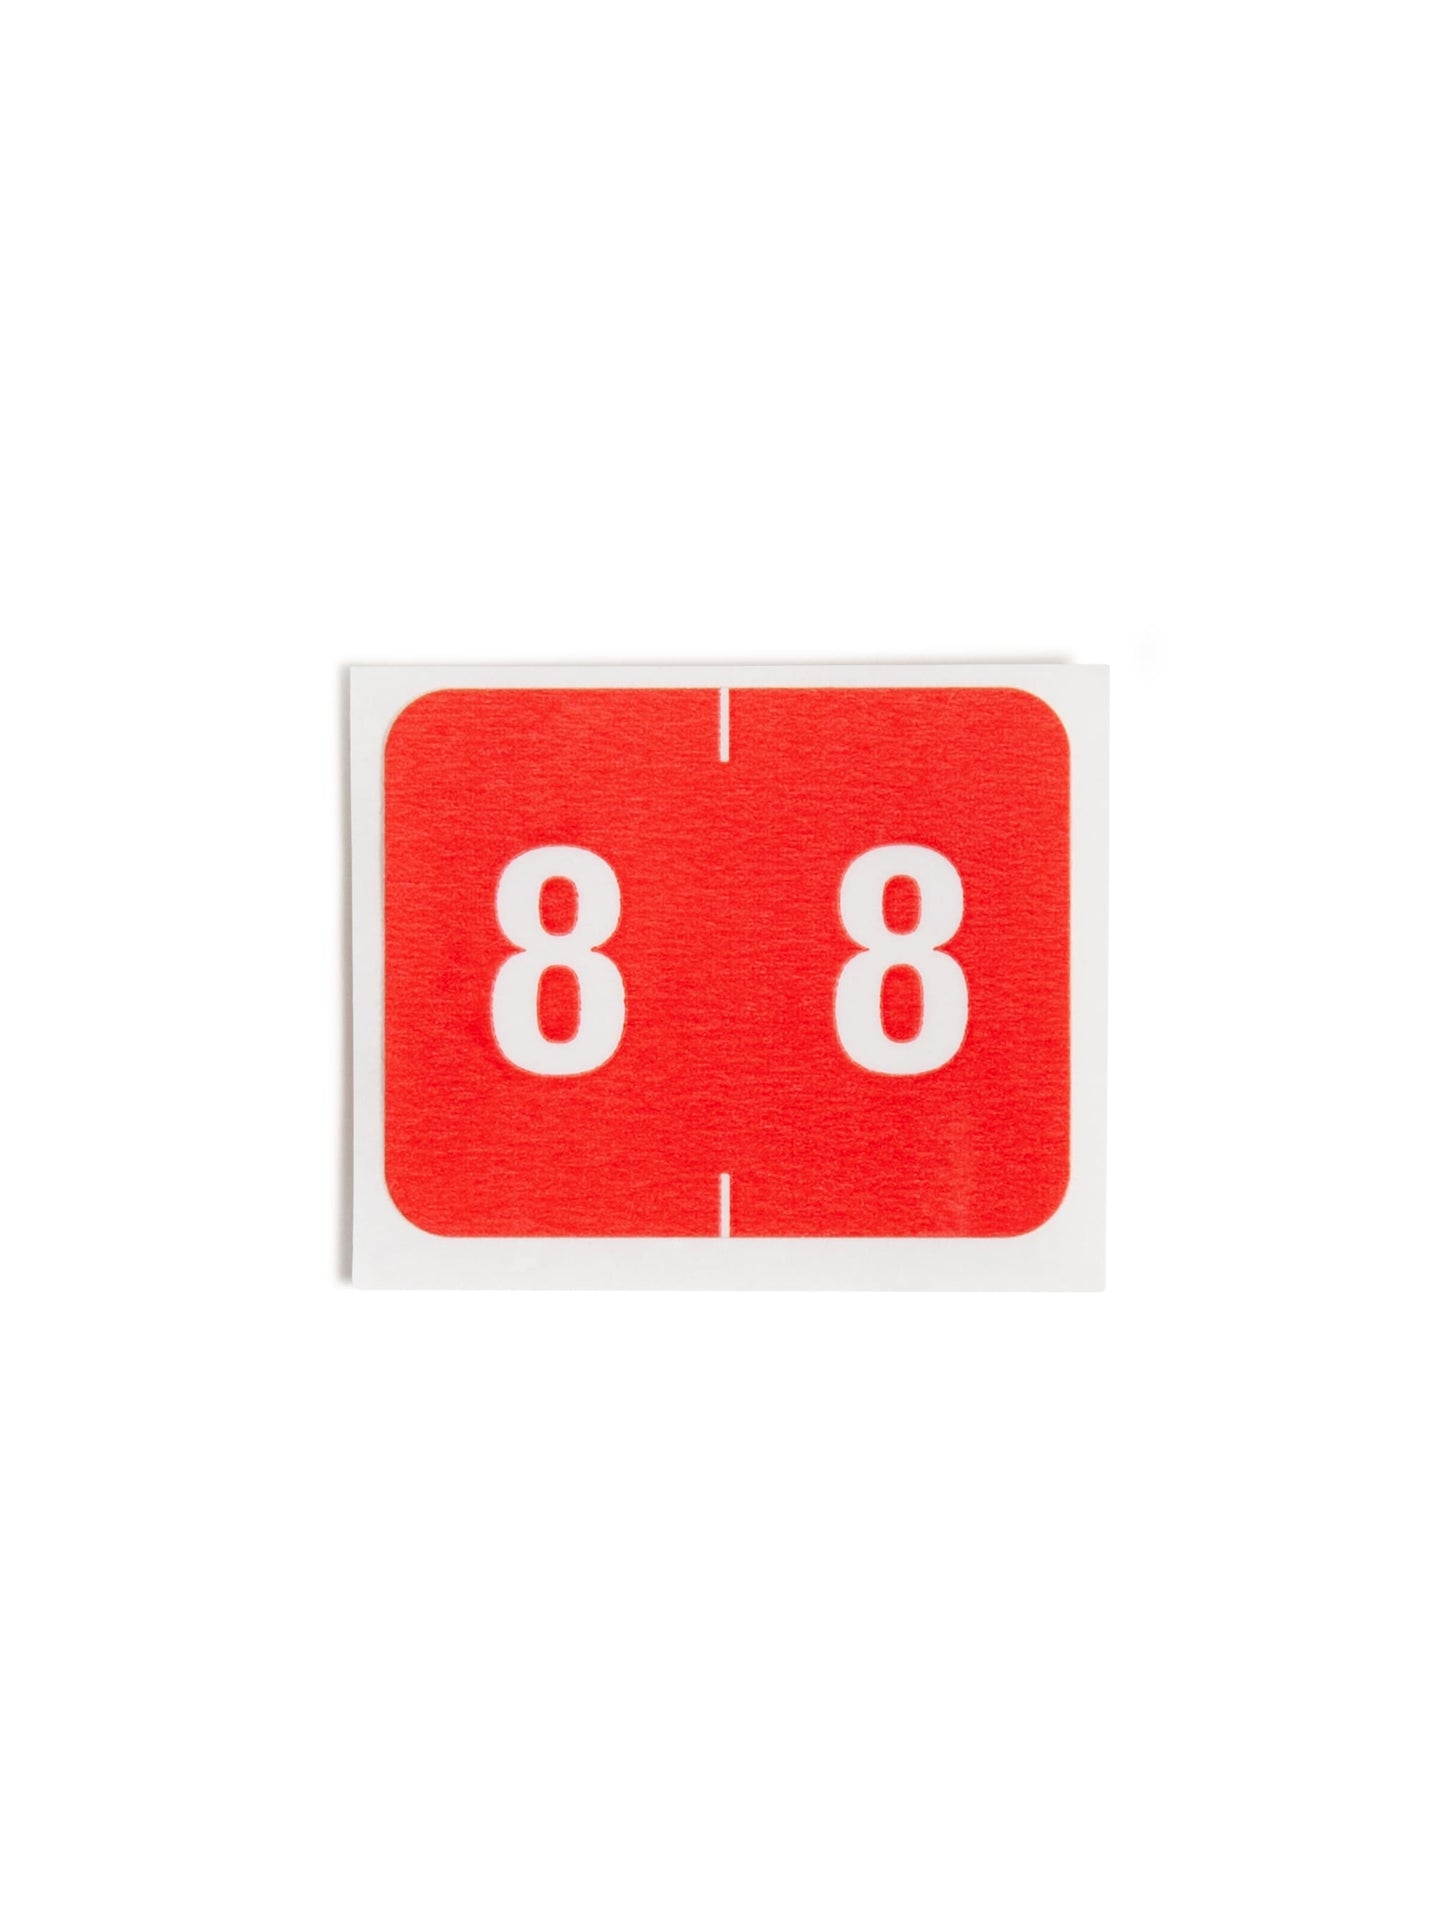 DCCRN Color-Coded Numeric Labels - Rolls, Red Color, 1-1/4" X 1" Size, Set of 1, 086486673488